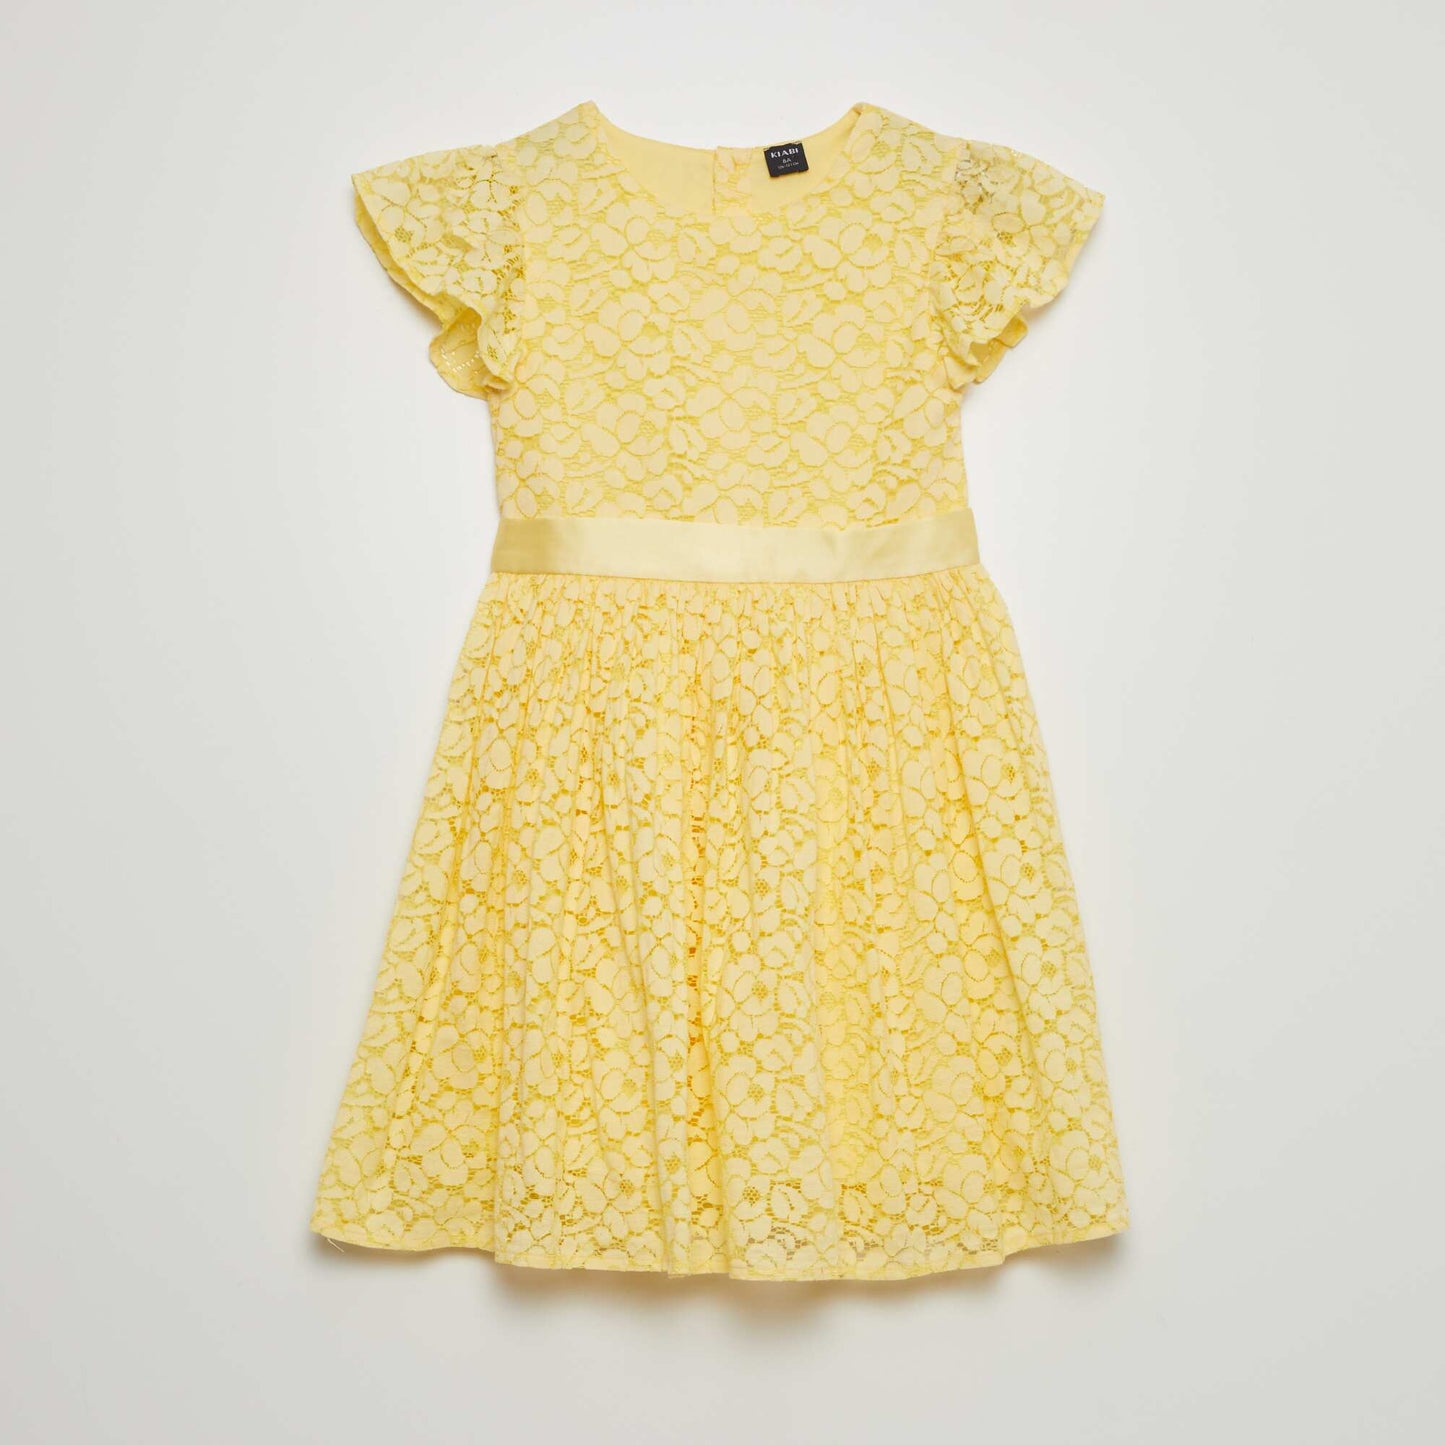 Lace party dress YELLOW